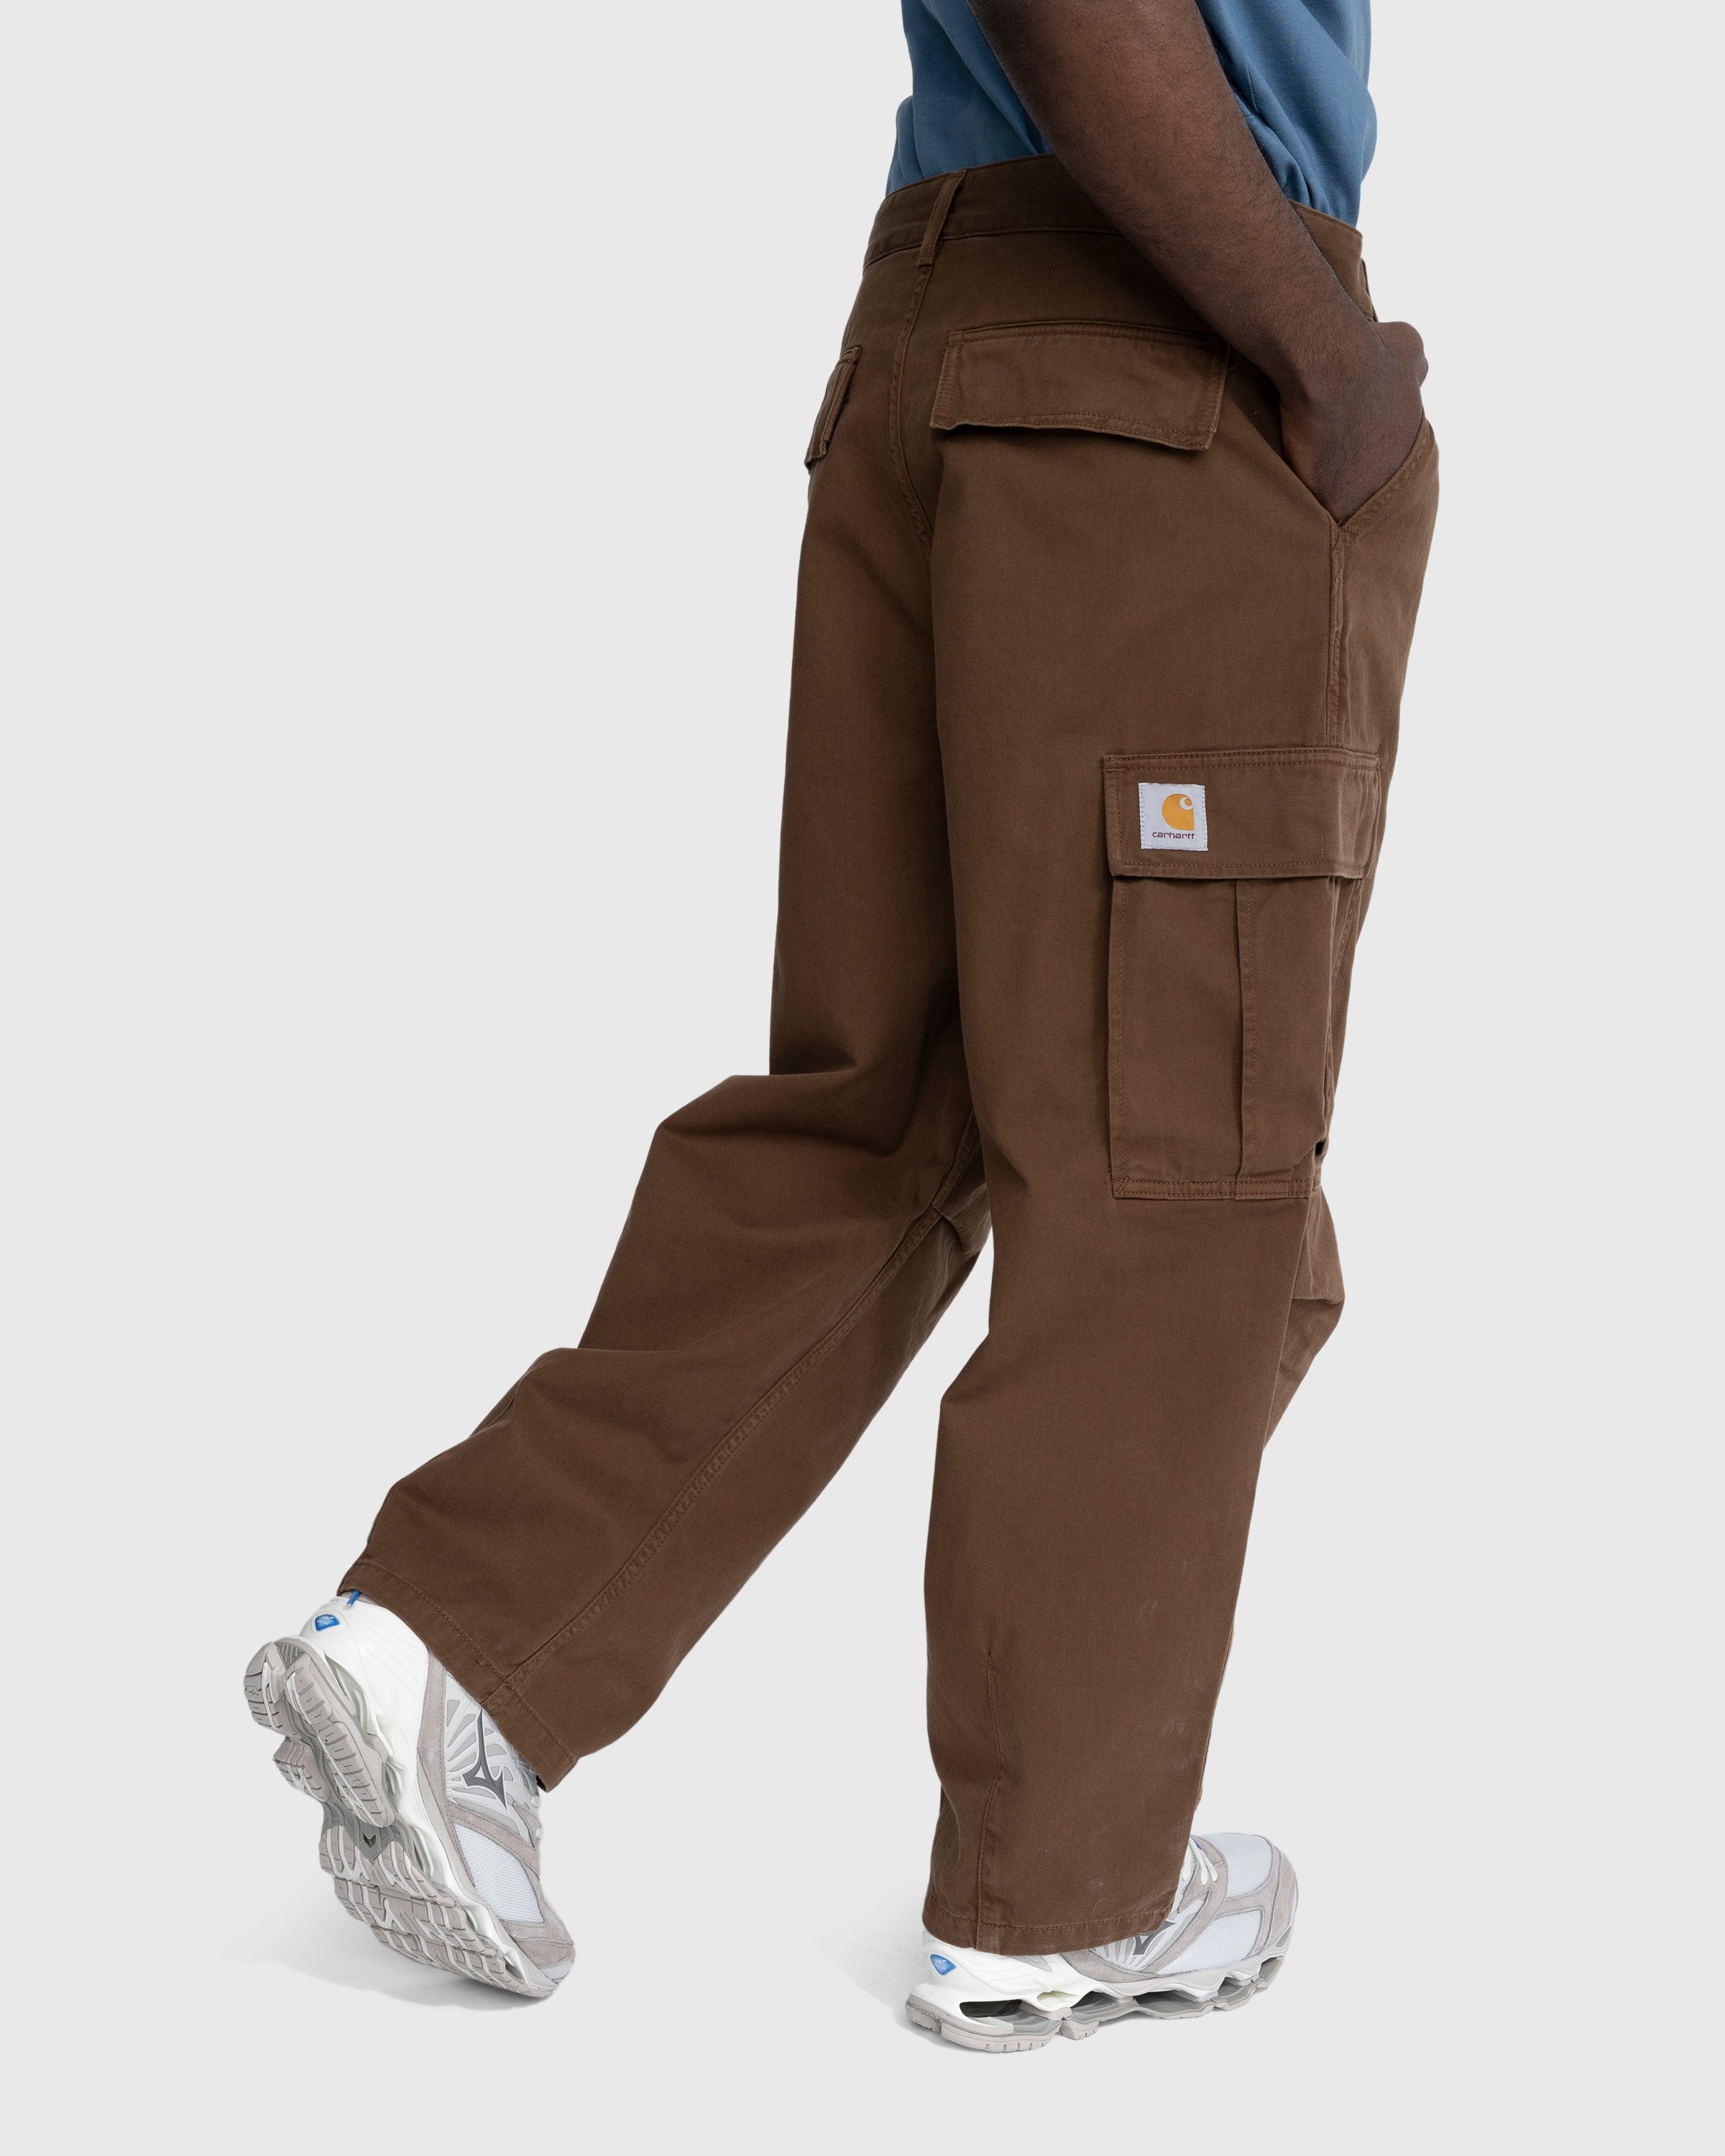 Norse Store  Shipping Worldwide - Carhartt WIP Wide Panel Pant - Hamilton  Brown